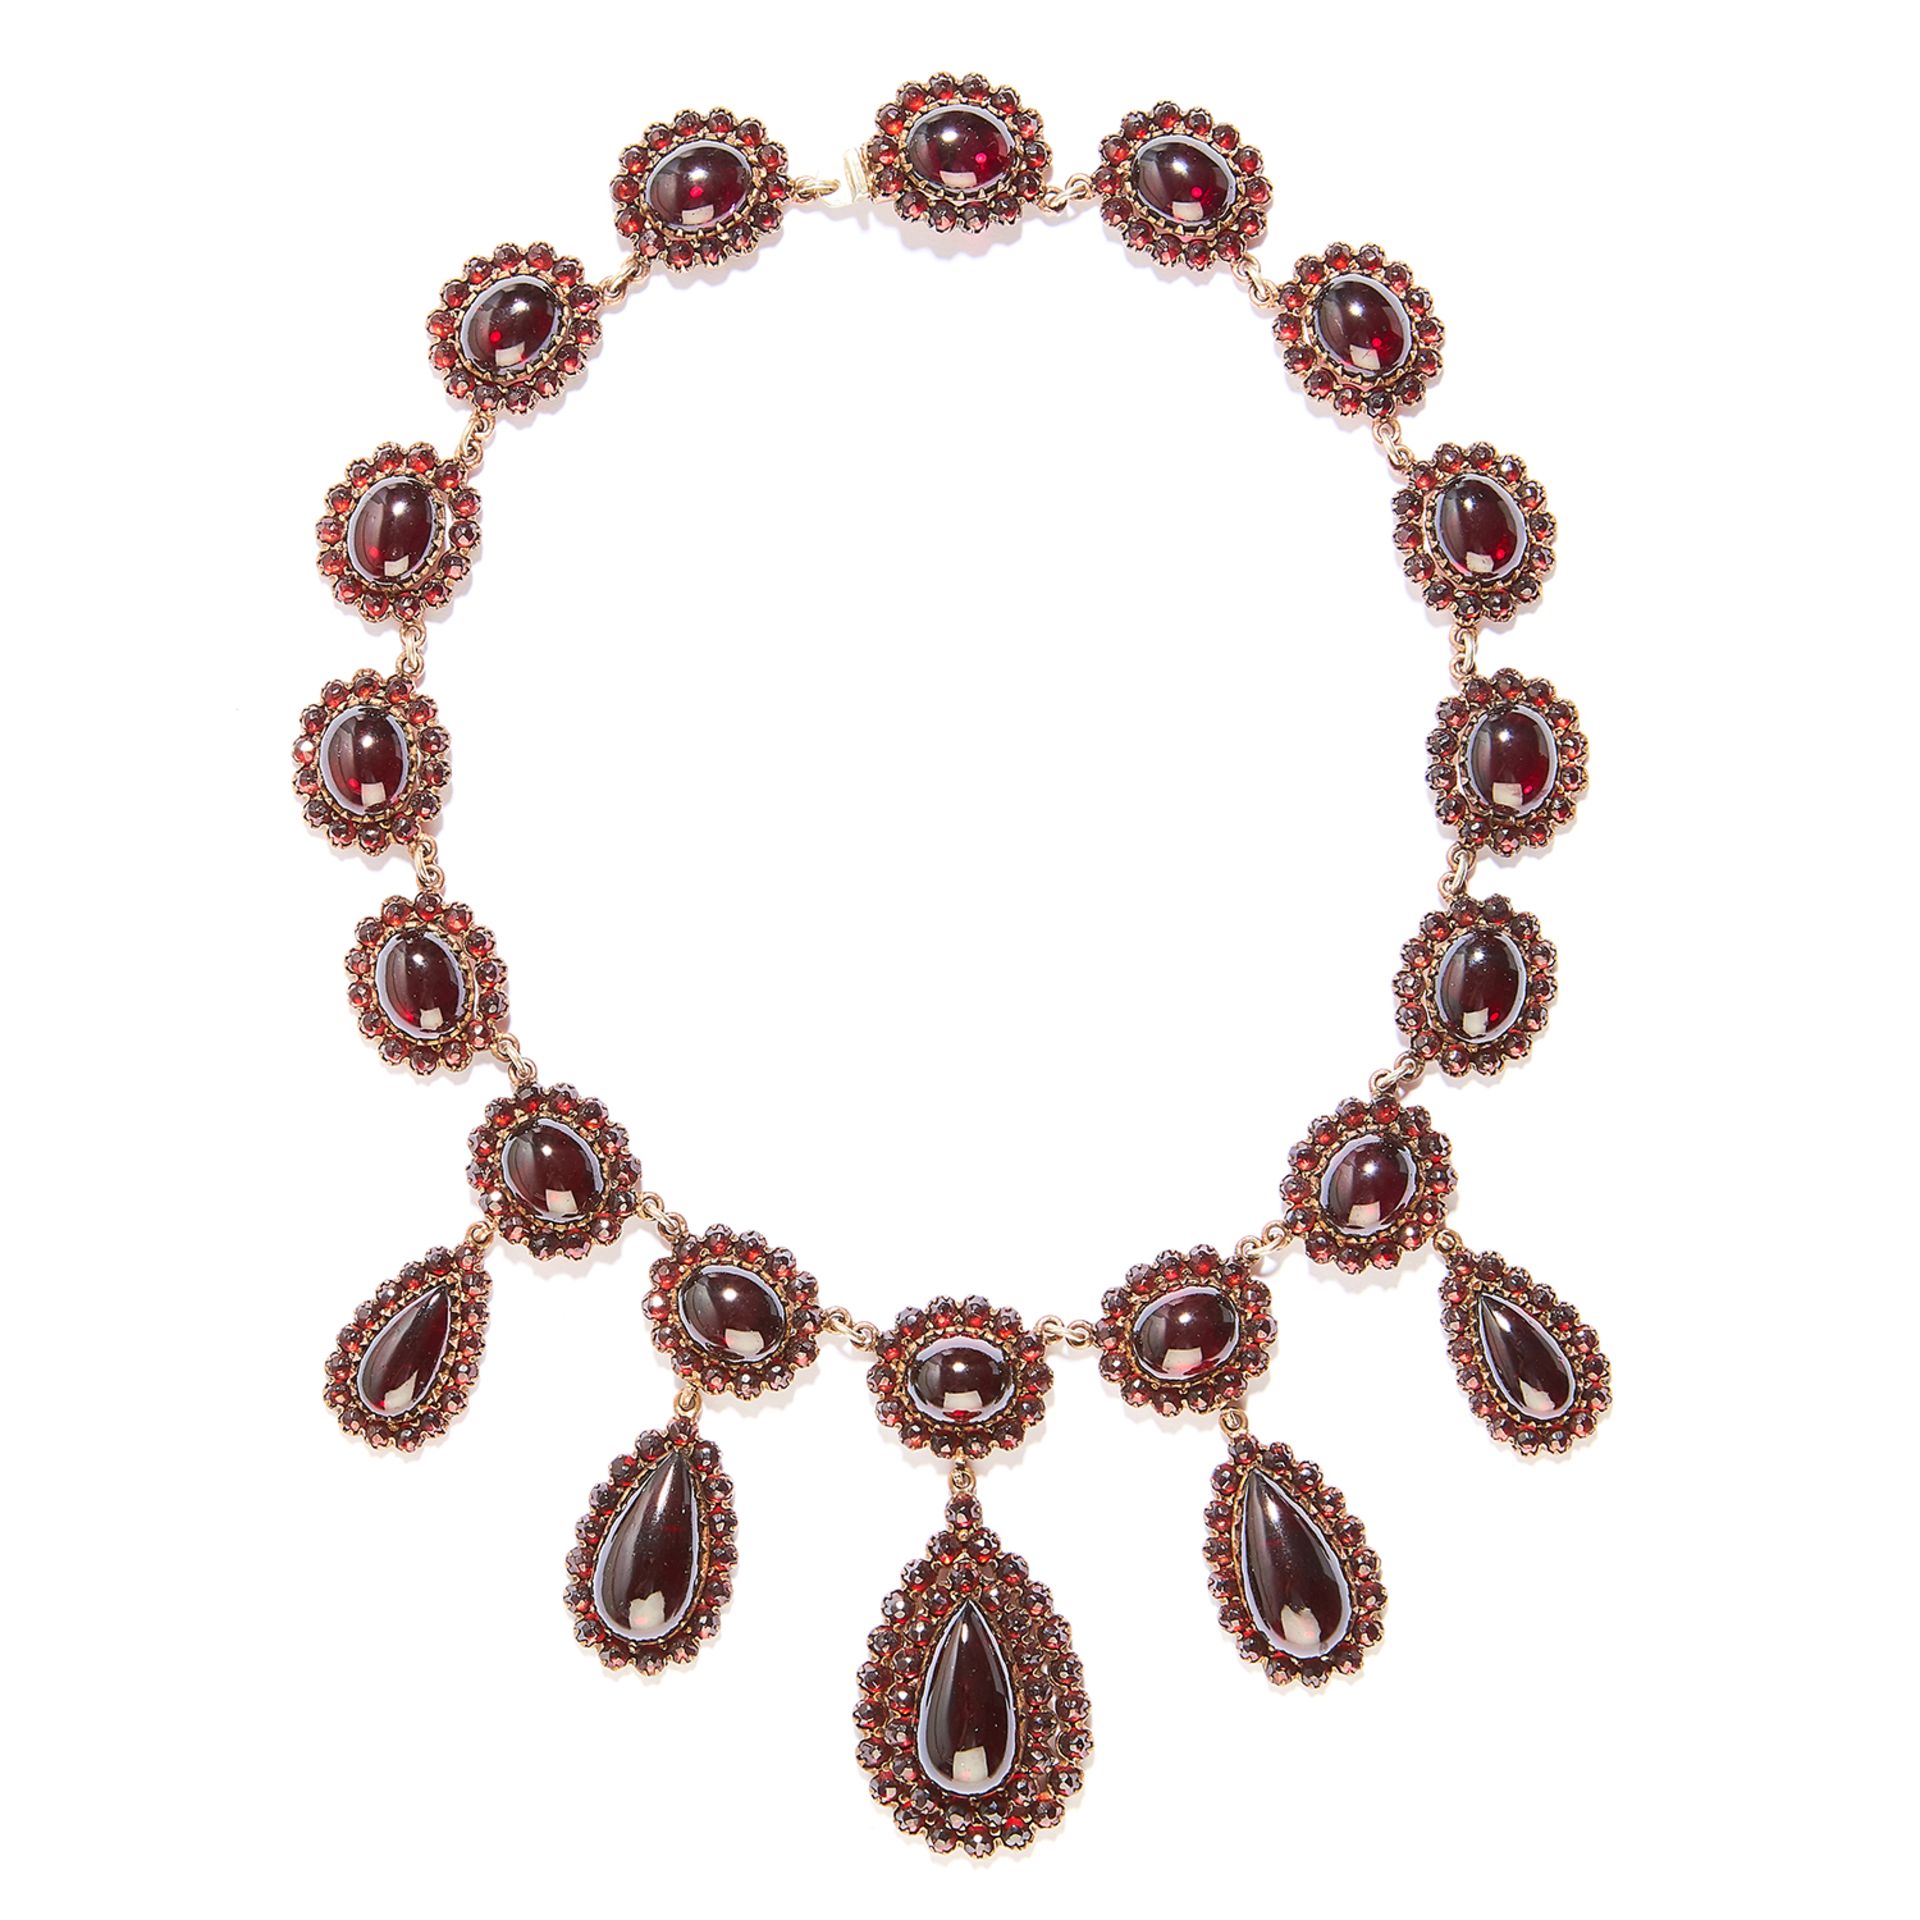 ANTIQUE GARNET NECKLACE AND EARRING SUITE in yellow gold, comprising of links of cabochon garnet